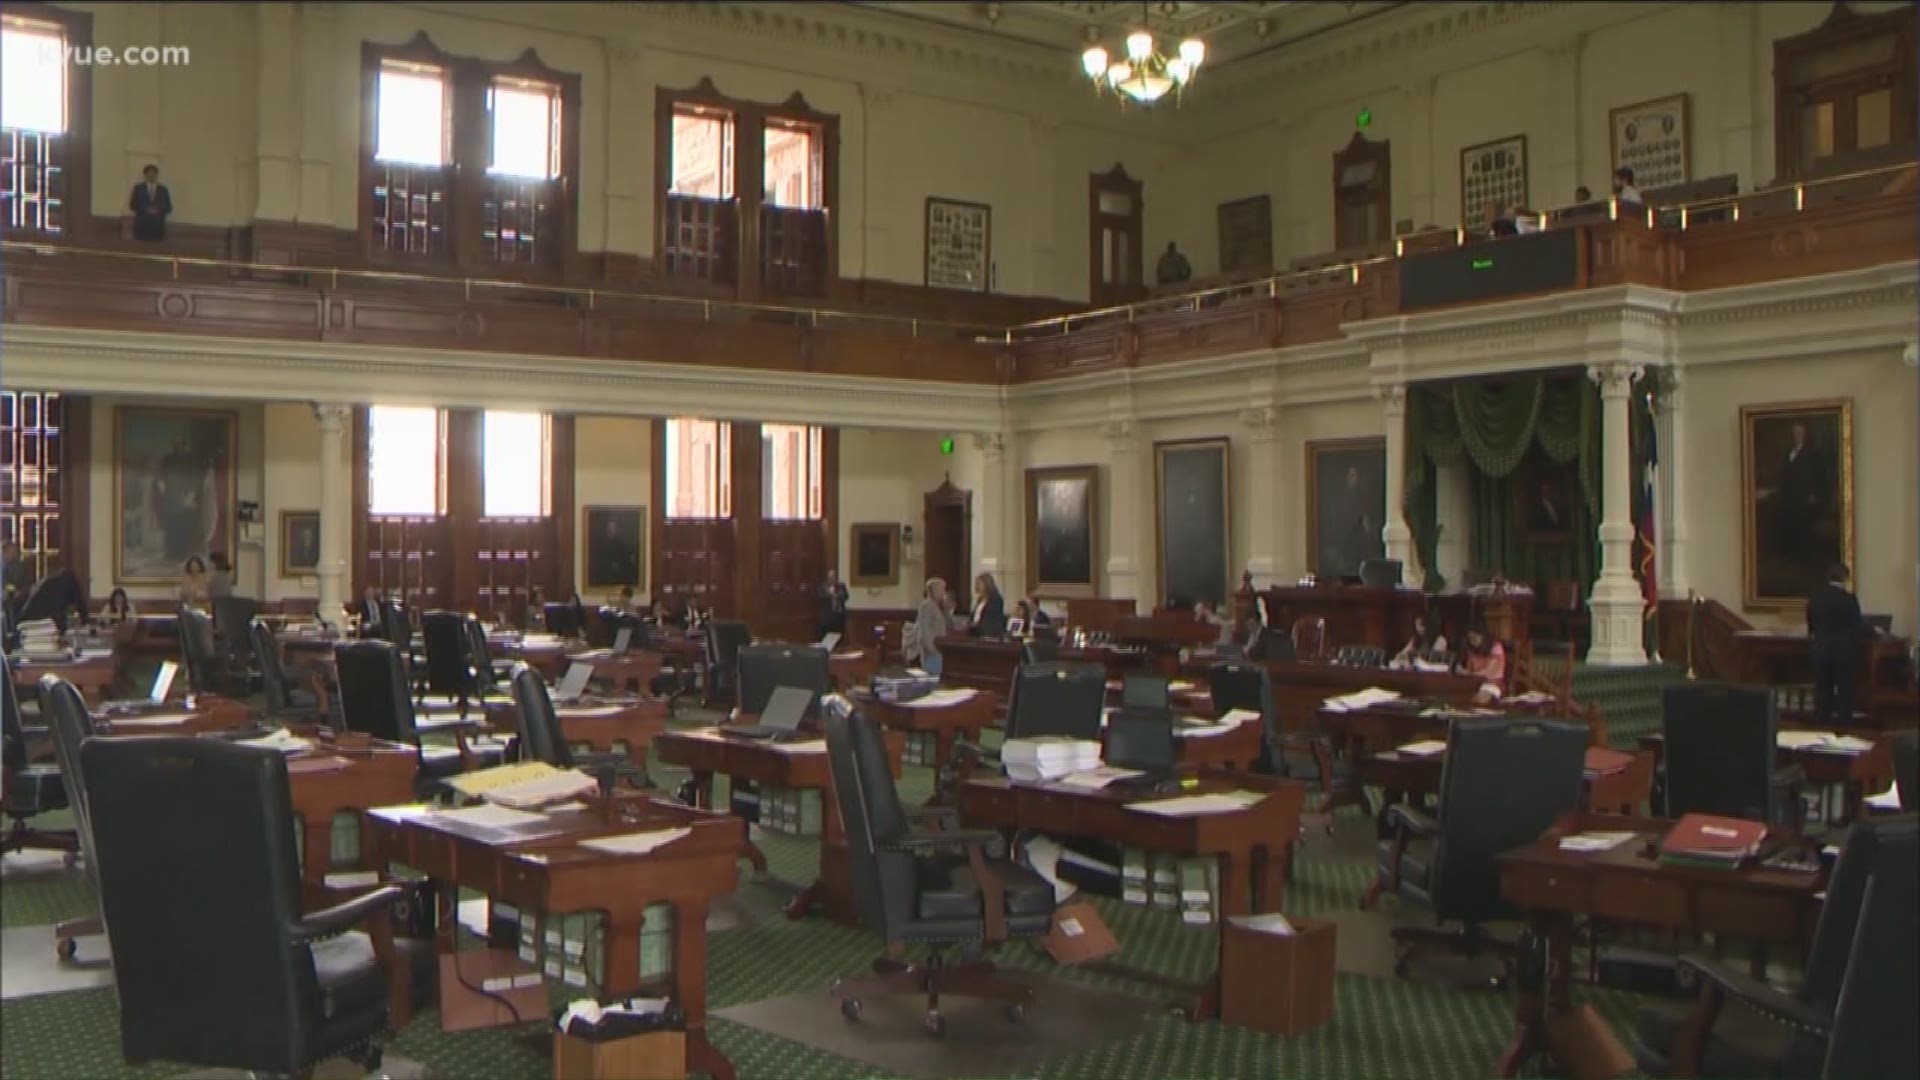 Thursday, the Texas House of Representatives was set to debate House Bill 2, a bill designed to slow the growth of property tax bills. But that didn't happen.